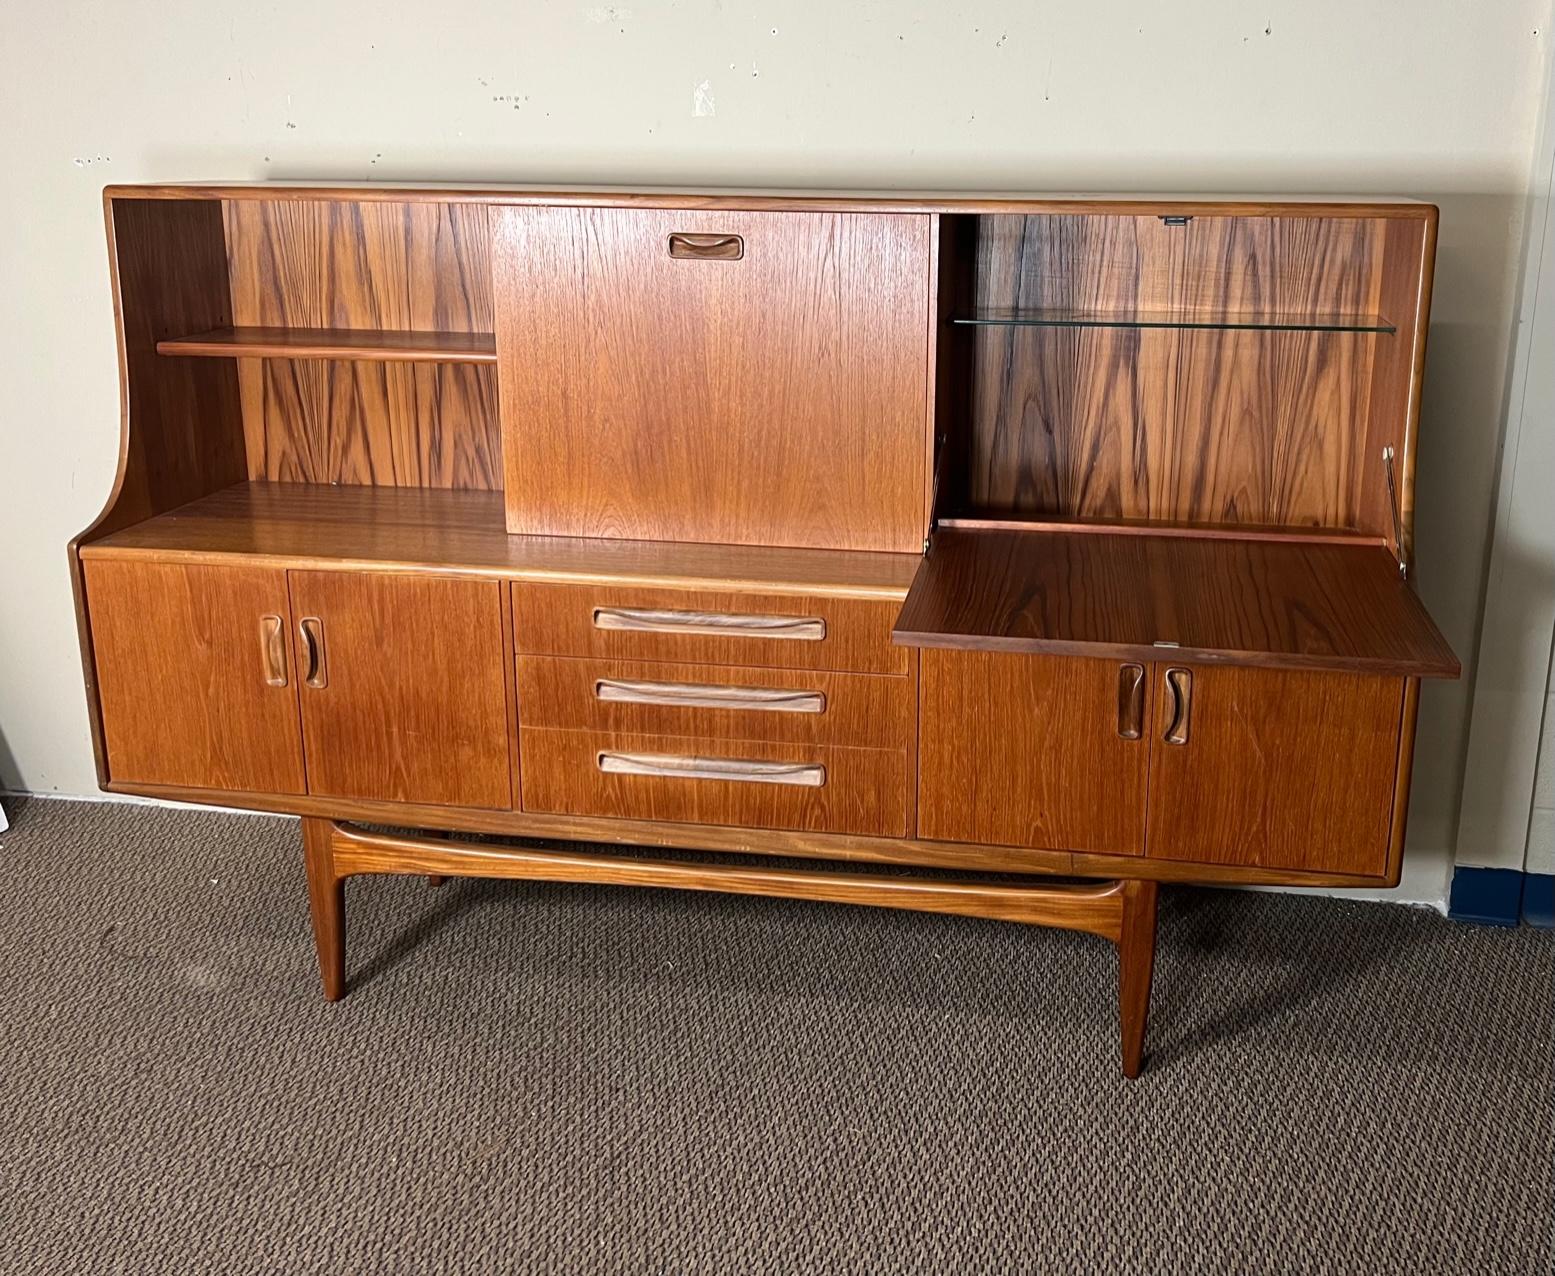 Mid-Century Modern versatile high board by G Plan. Featuring a sliding door and a small drop down desk that can comfortably hold a laptop or be used as a wine bar. Shelves are adjustable. Unfinished back.

Very good condition overall. All drawers